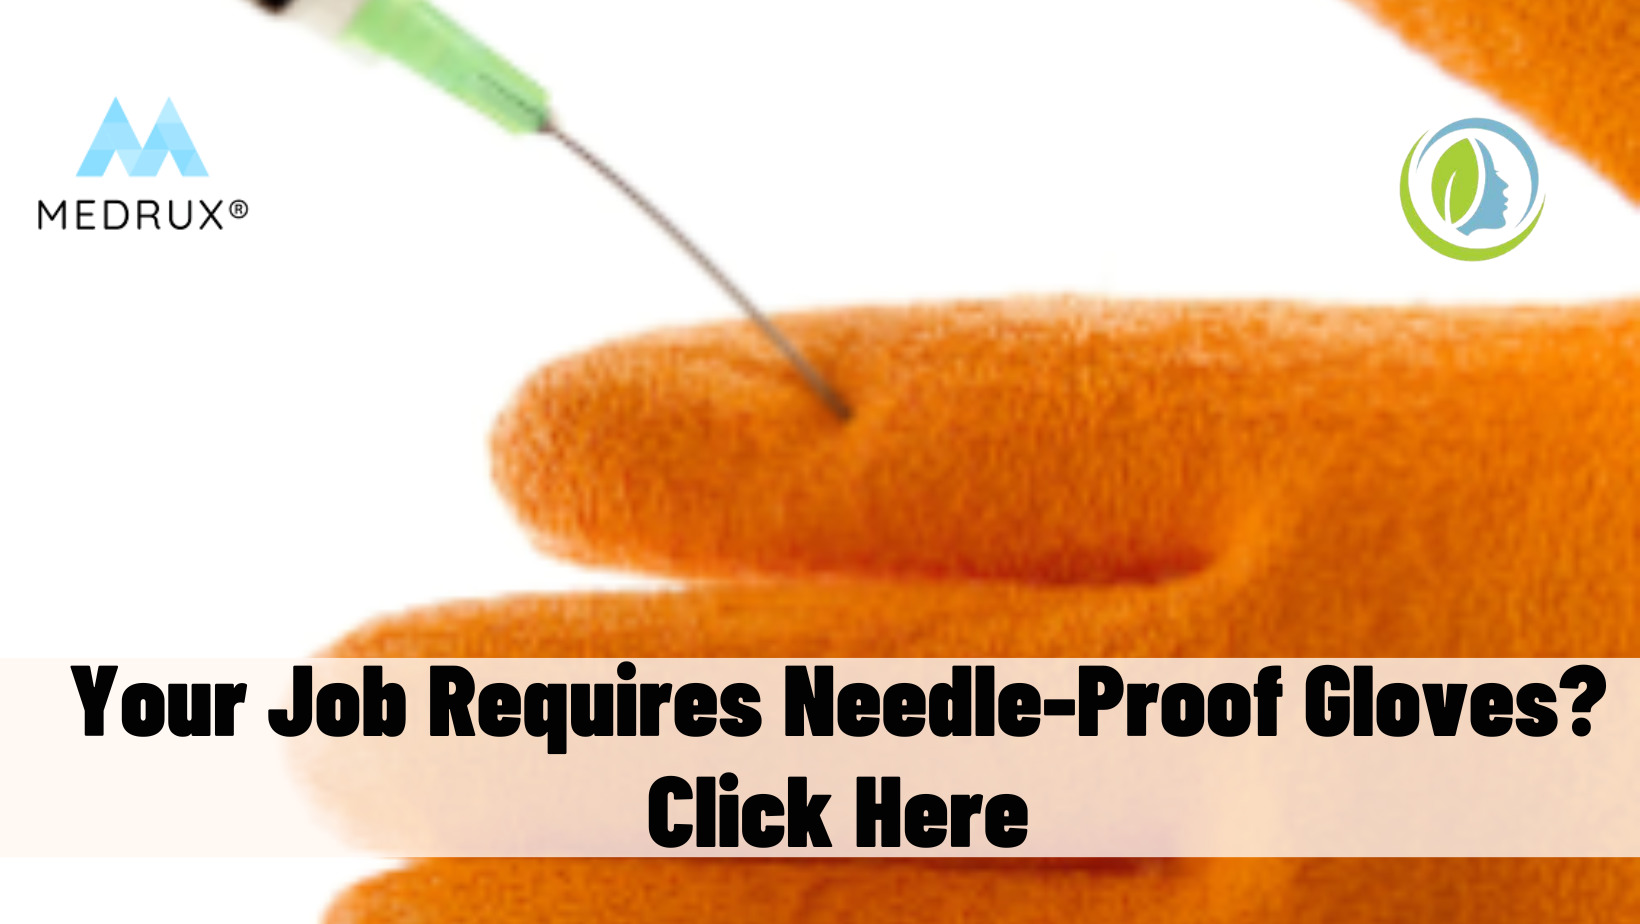 Flexible needle goes soft after injections for safety and comfort